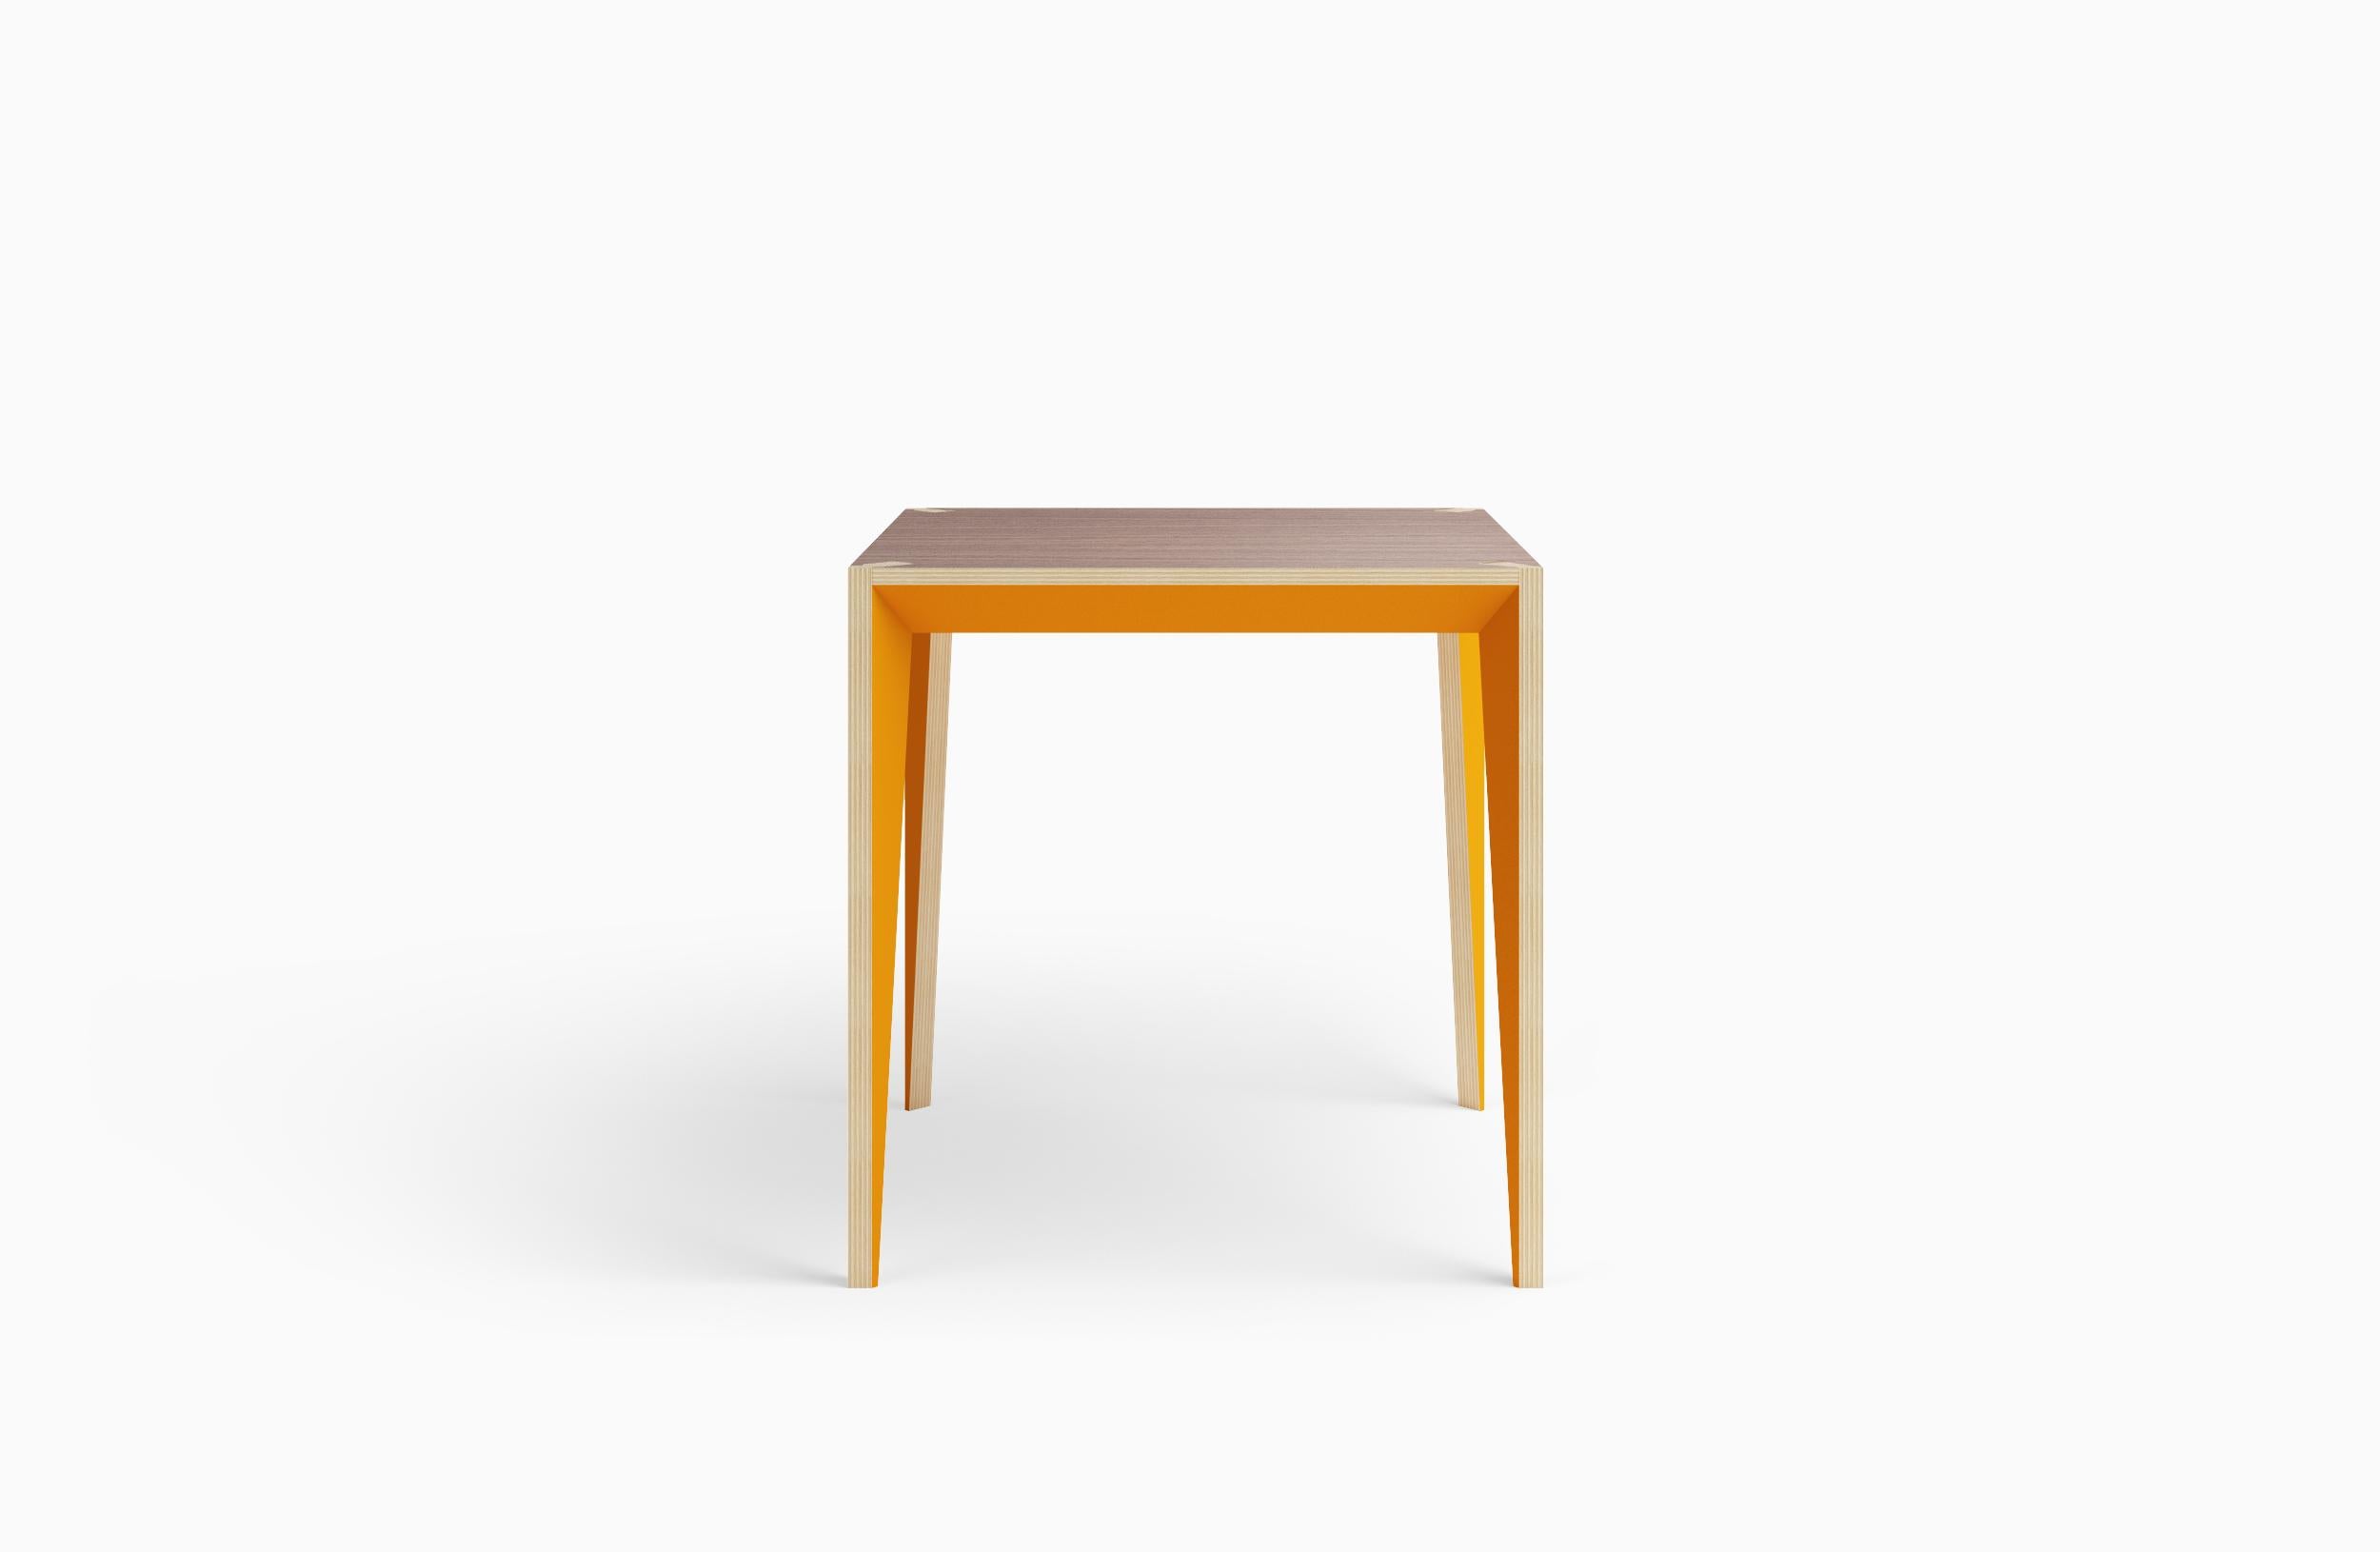 Merging a minimal look with warm materials, the faceted geometry of the MiMi square table creates a slender, elegant profile punctuated with angled surfaces that capture light. The MiMi line was a NYCxDesign 2018 Honoree and German Design Award 2019